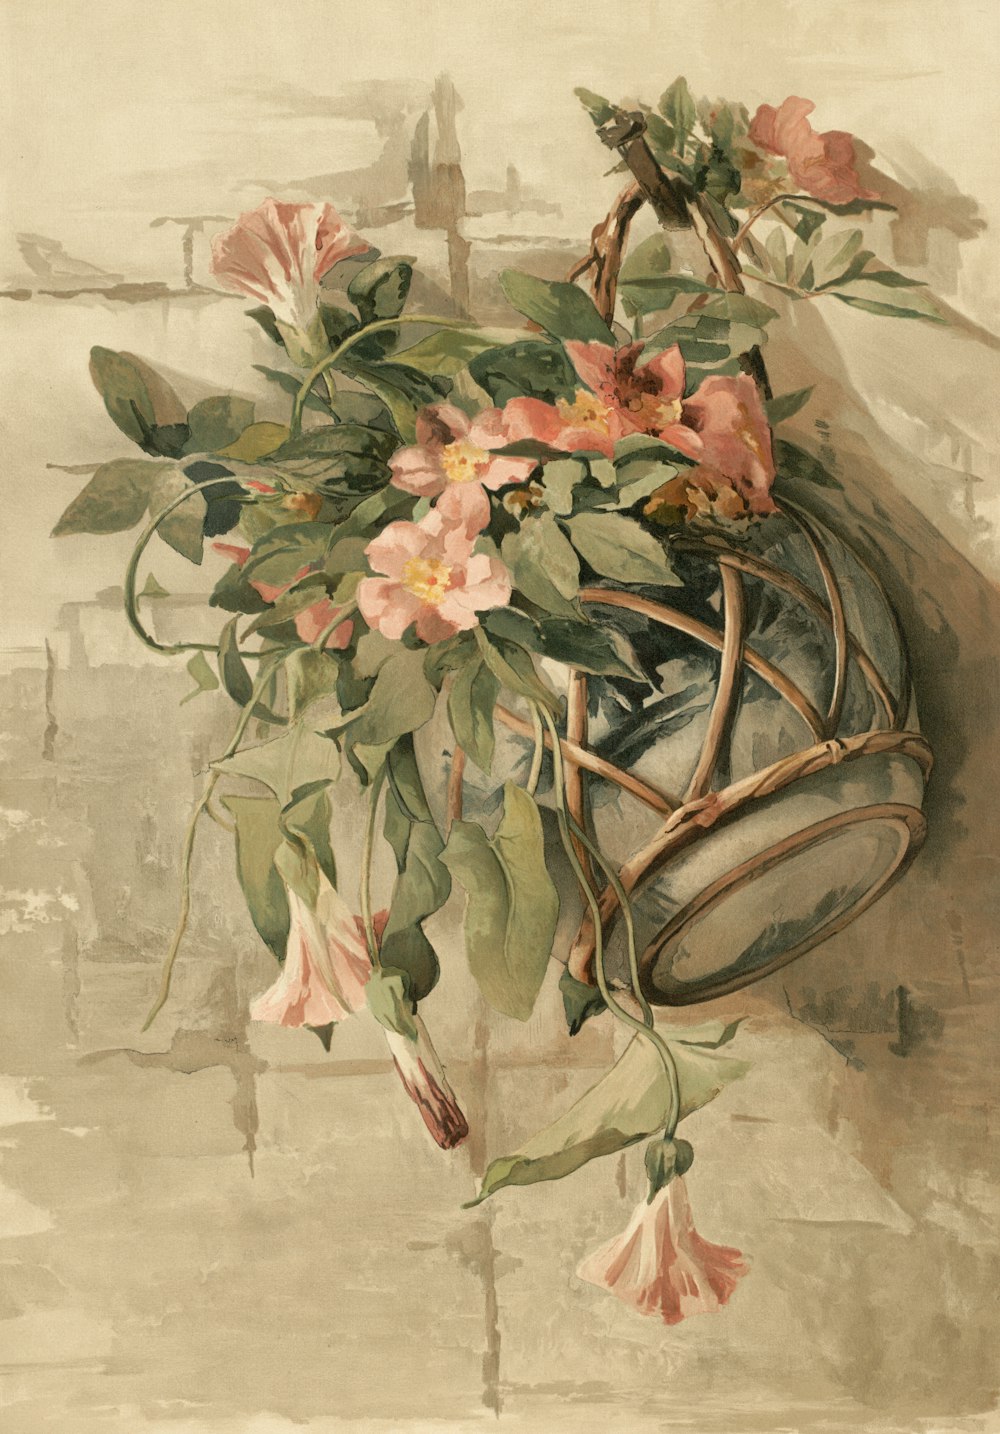 a painting of a vase filled with flowers